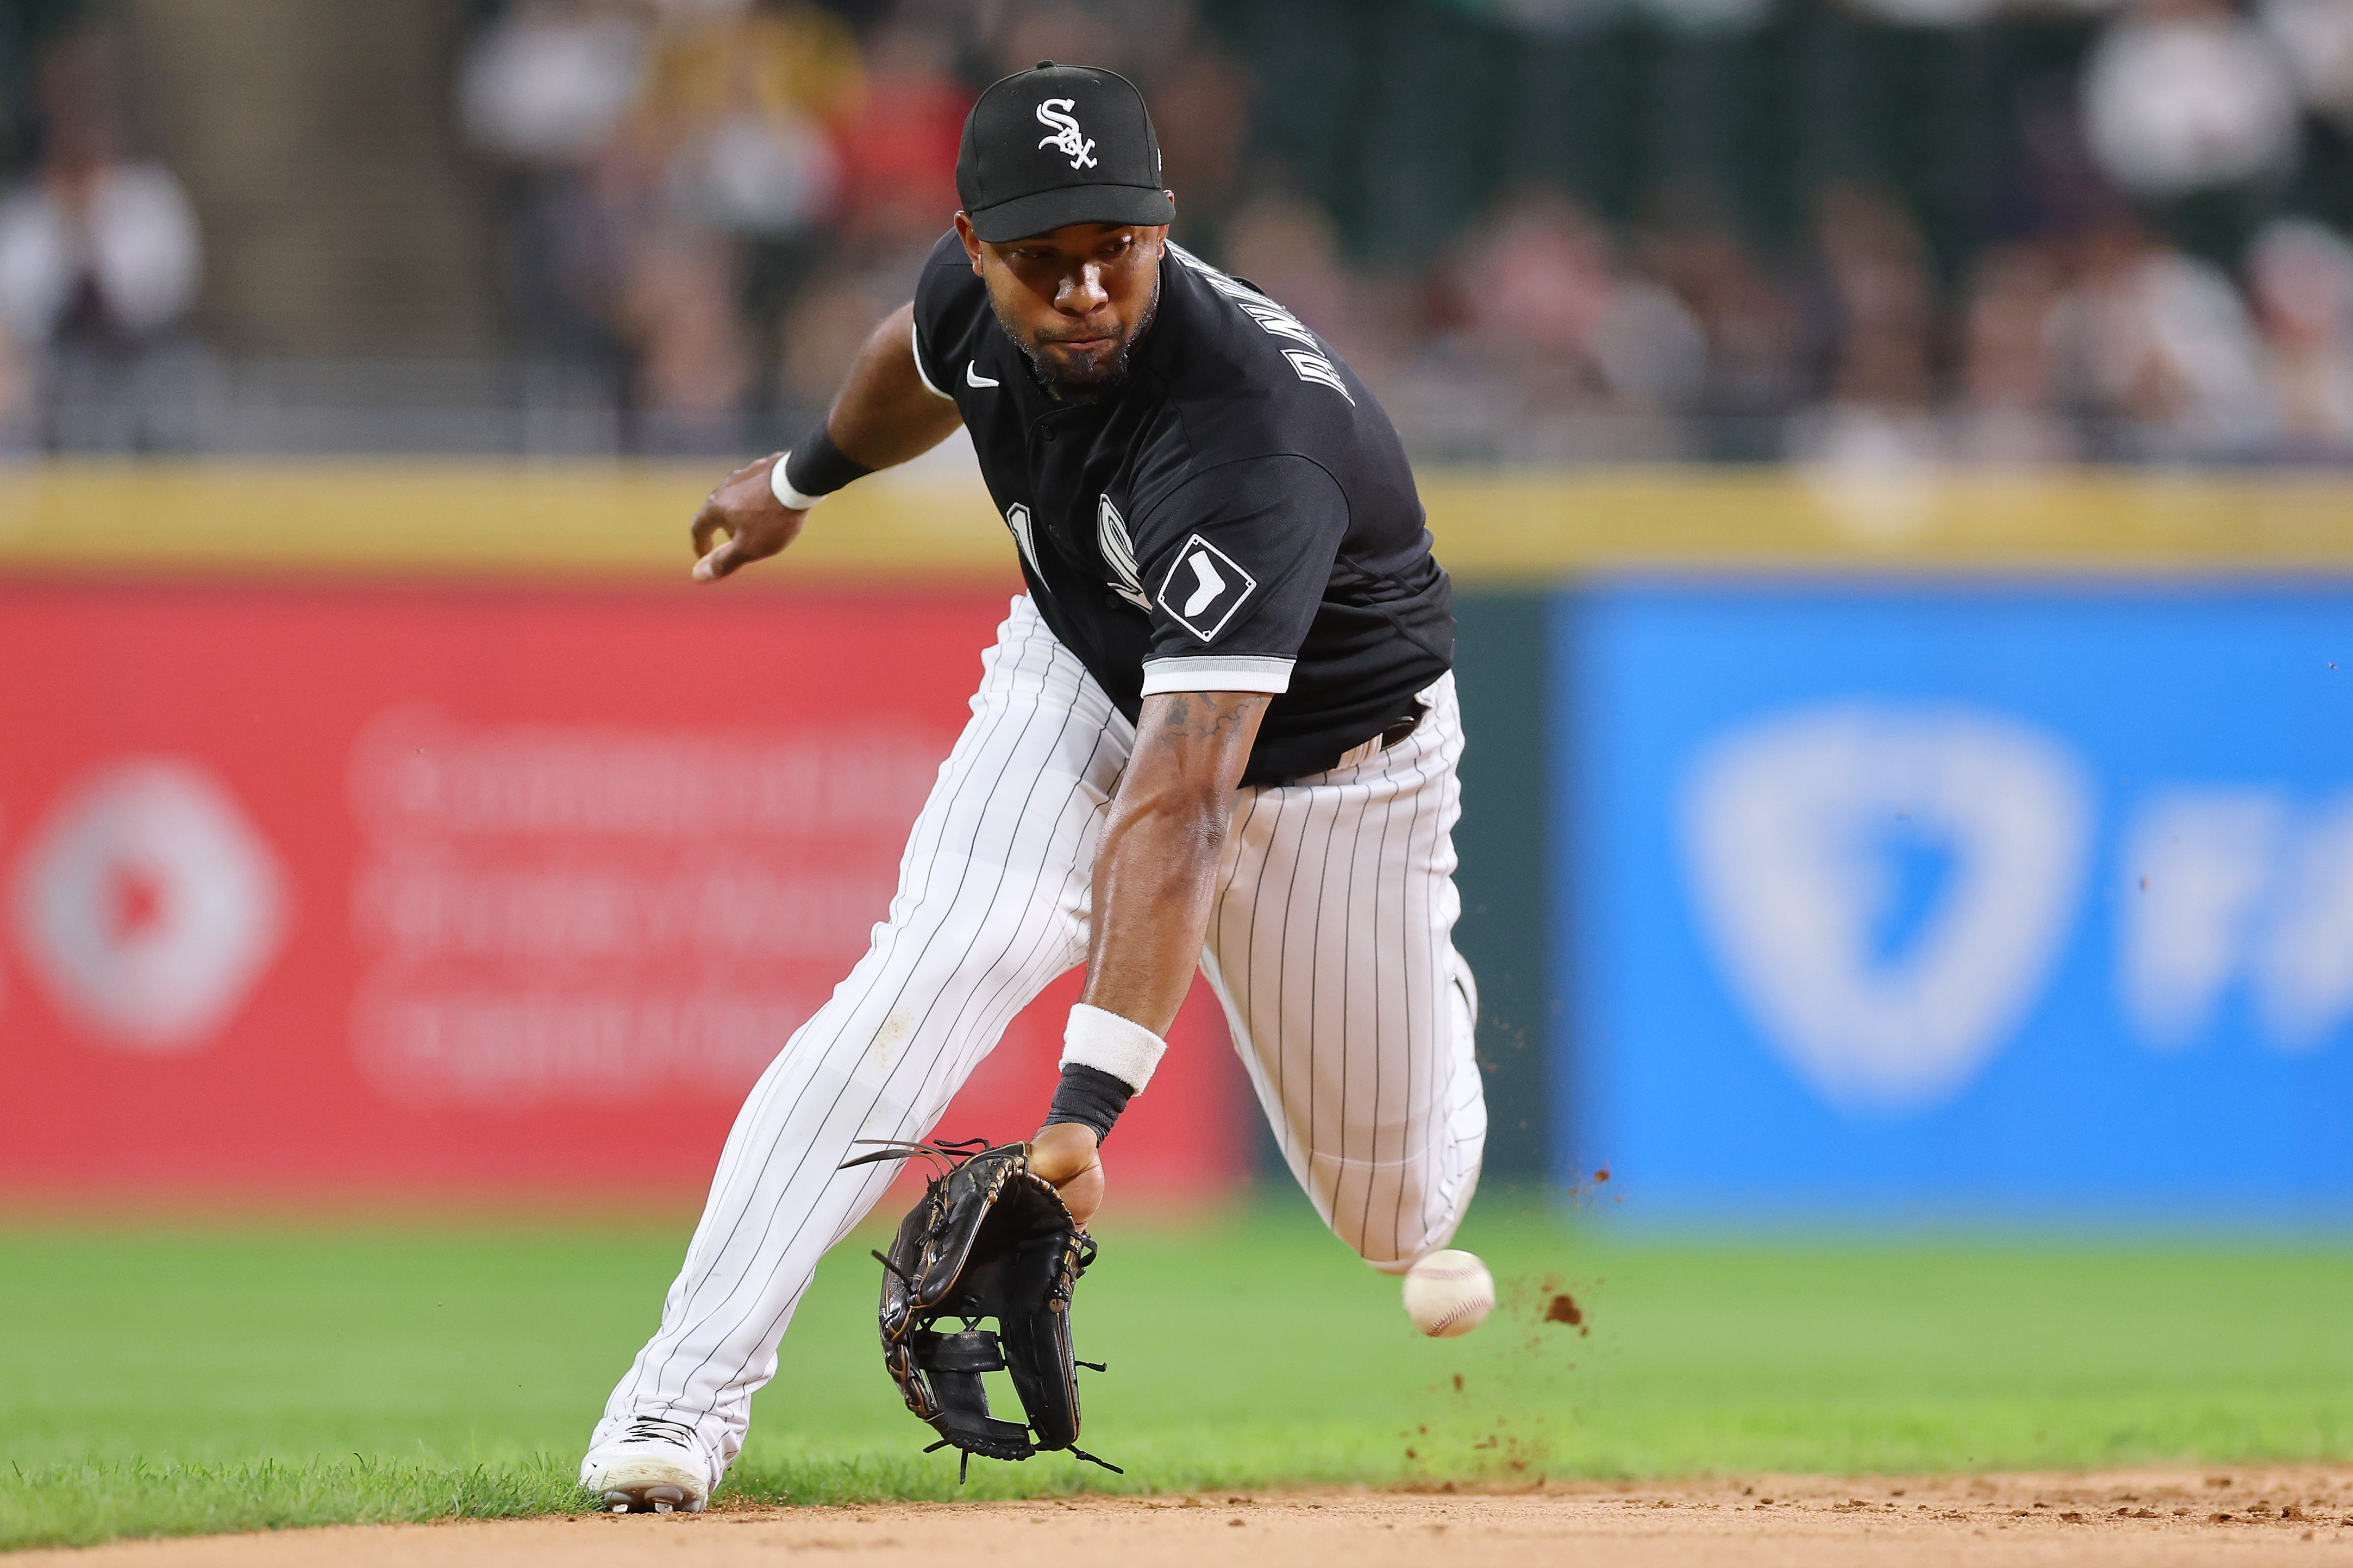 Elvis Andrus shows his value in 2-0 White Sox win – NBC Sports Chicago